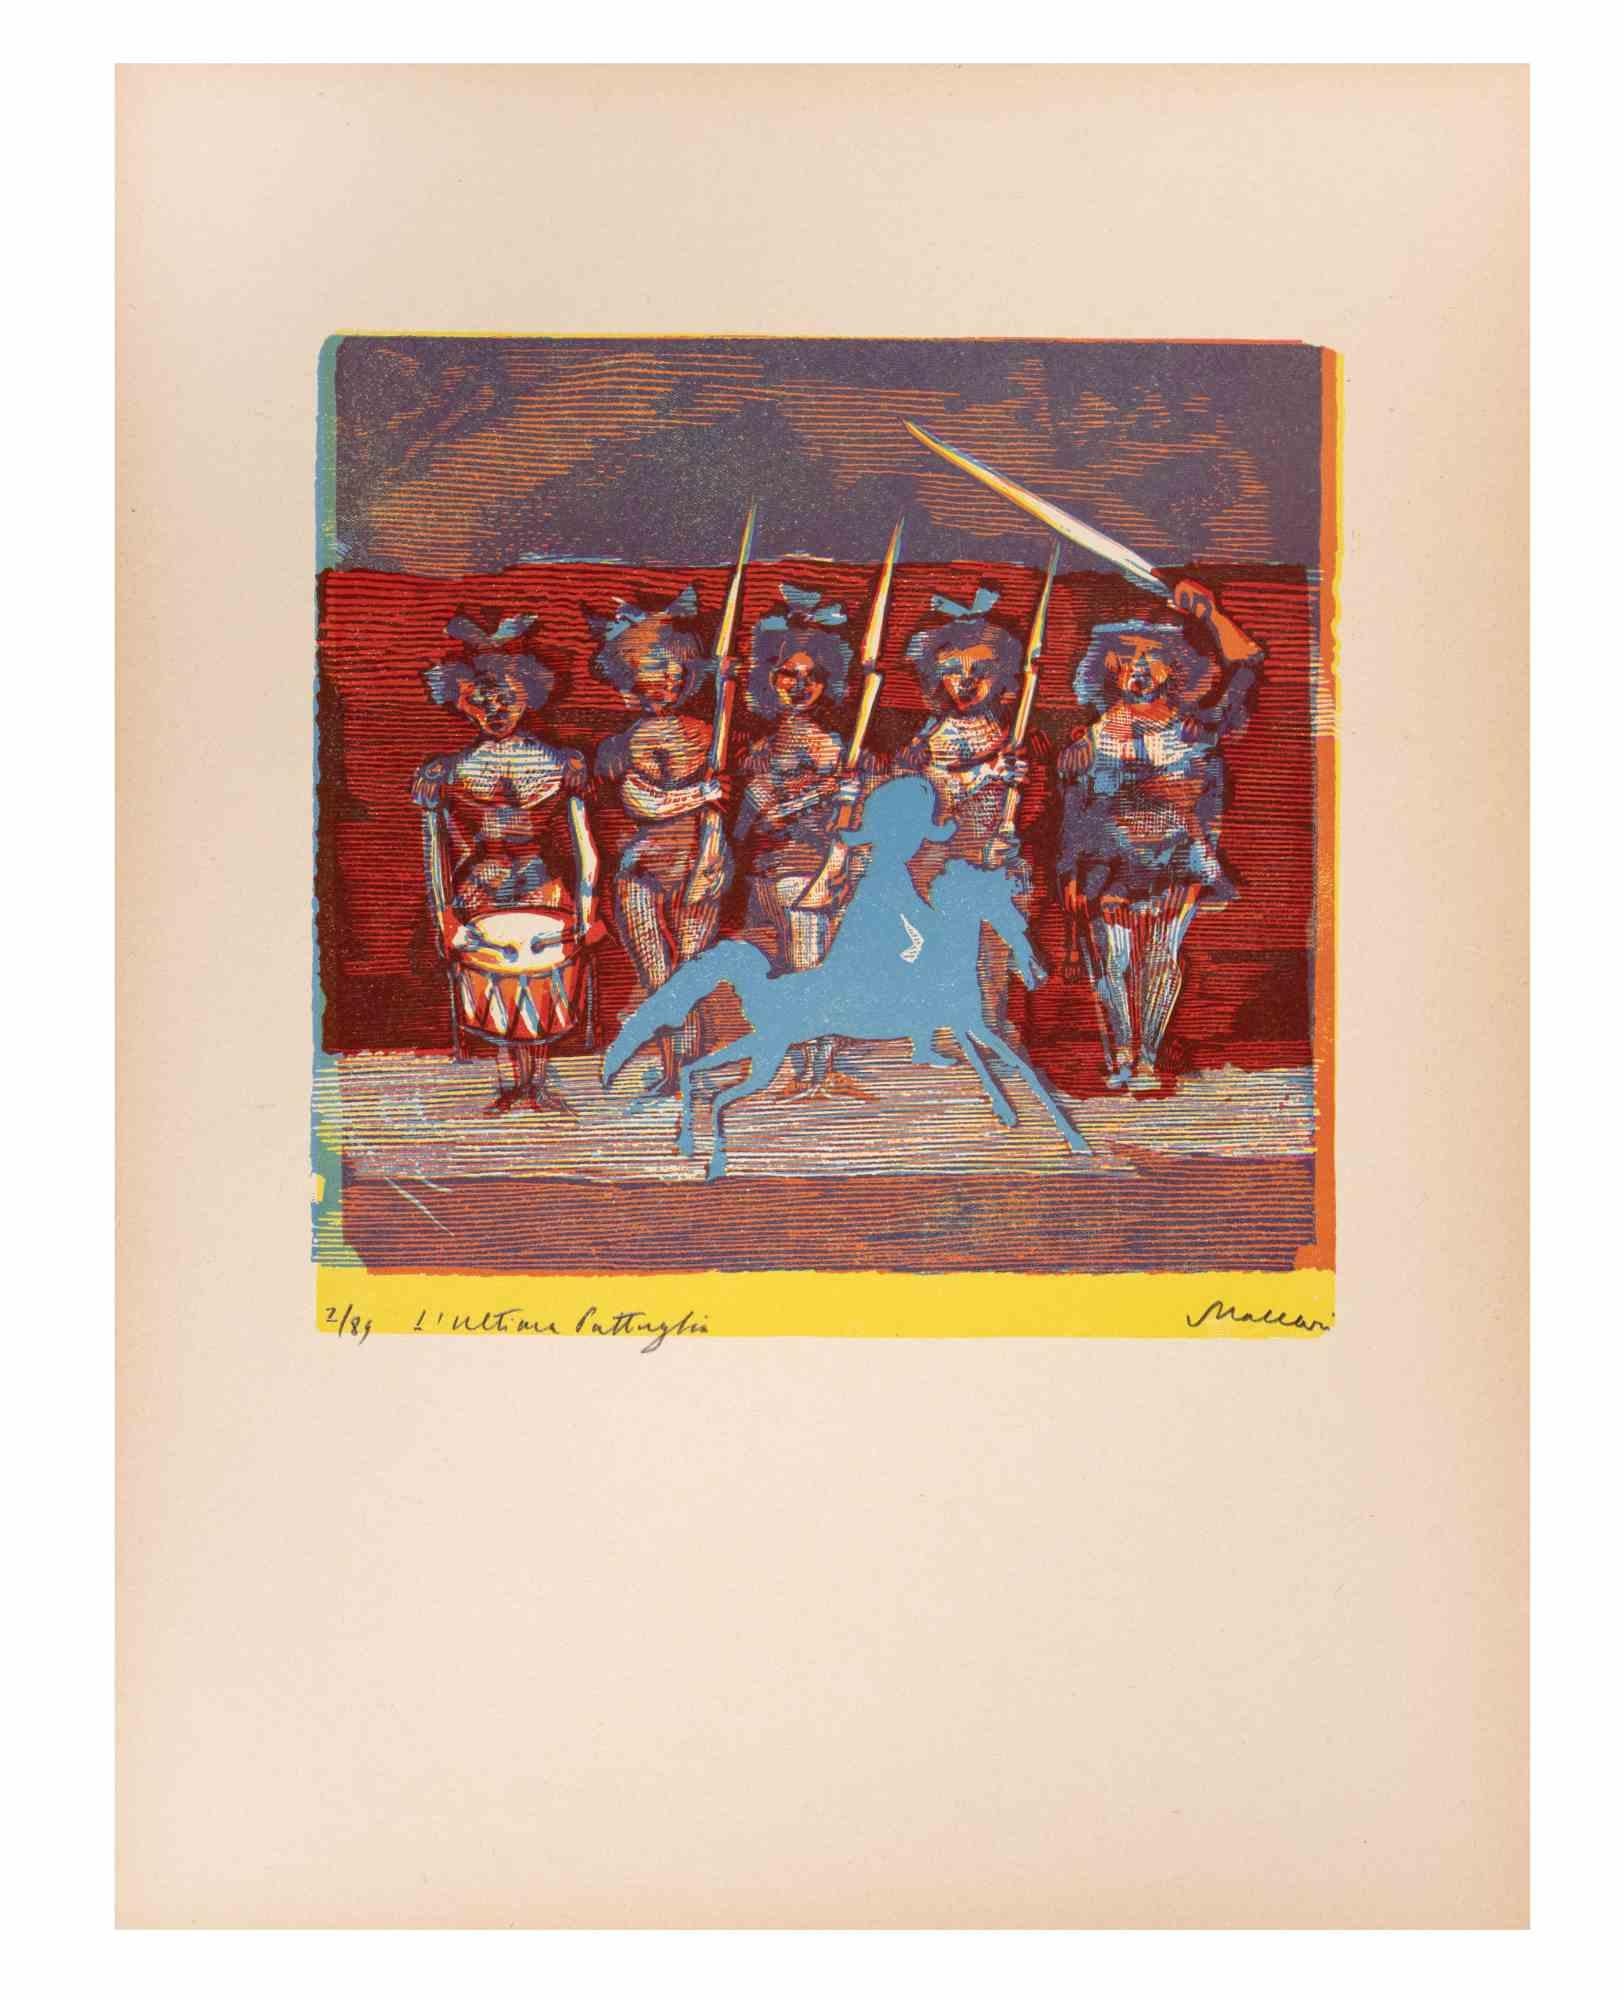 The Last Fight is an Artwork realized by Mino Maccari  (1924-1989) in the Mid-20th Century.

Colored woodcut on paper. Hand-signed on the lower, numbered 2/89 specimens and titled on the left margin.

Good conditions.

Mino Maccari (Siena,